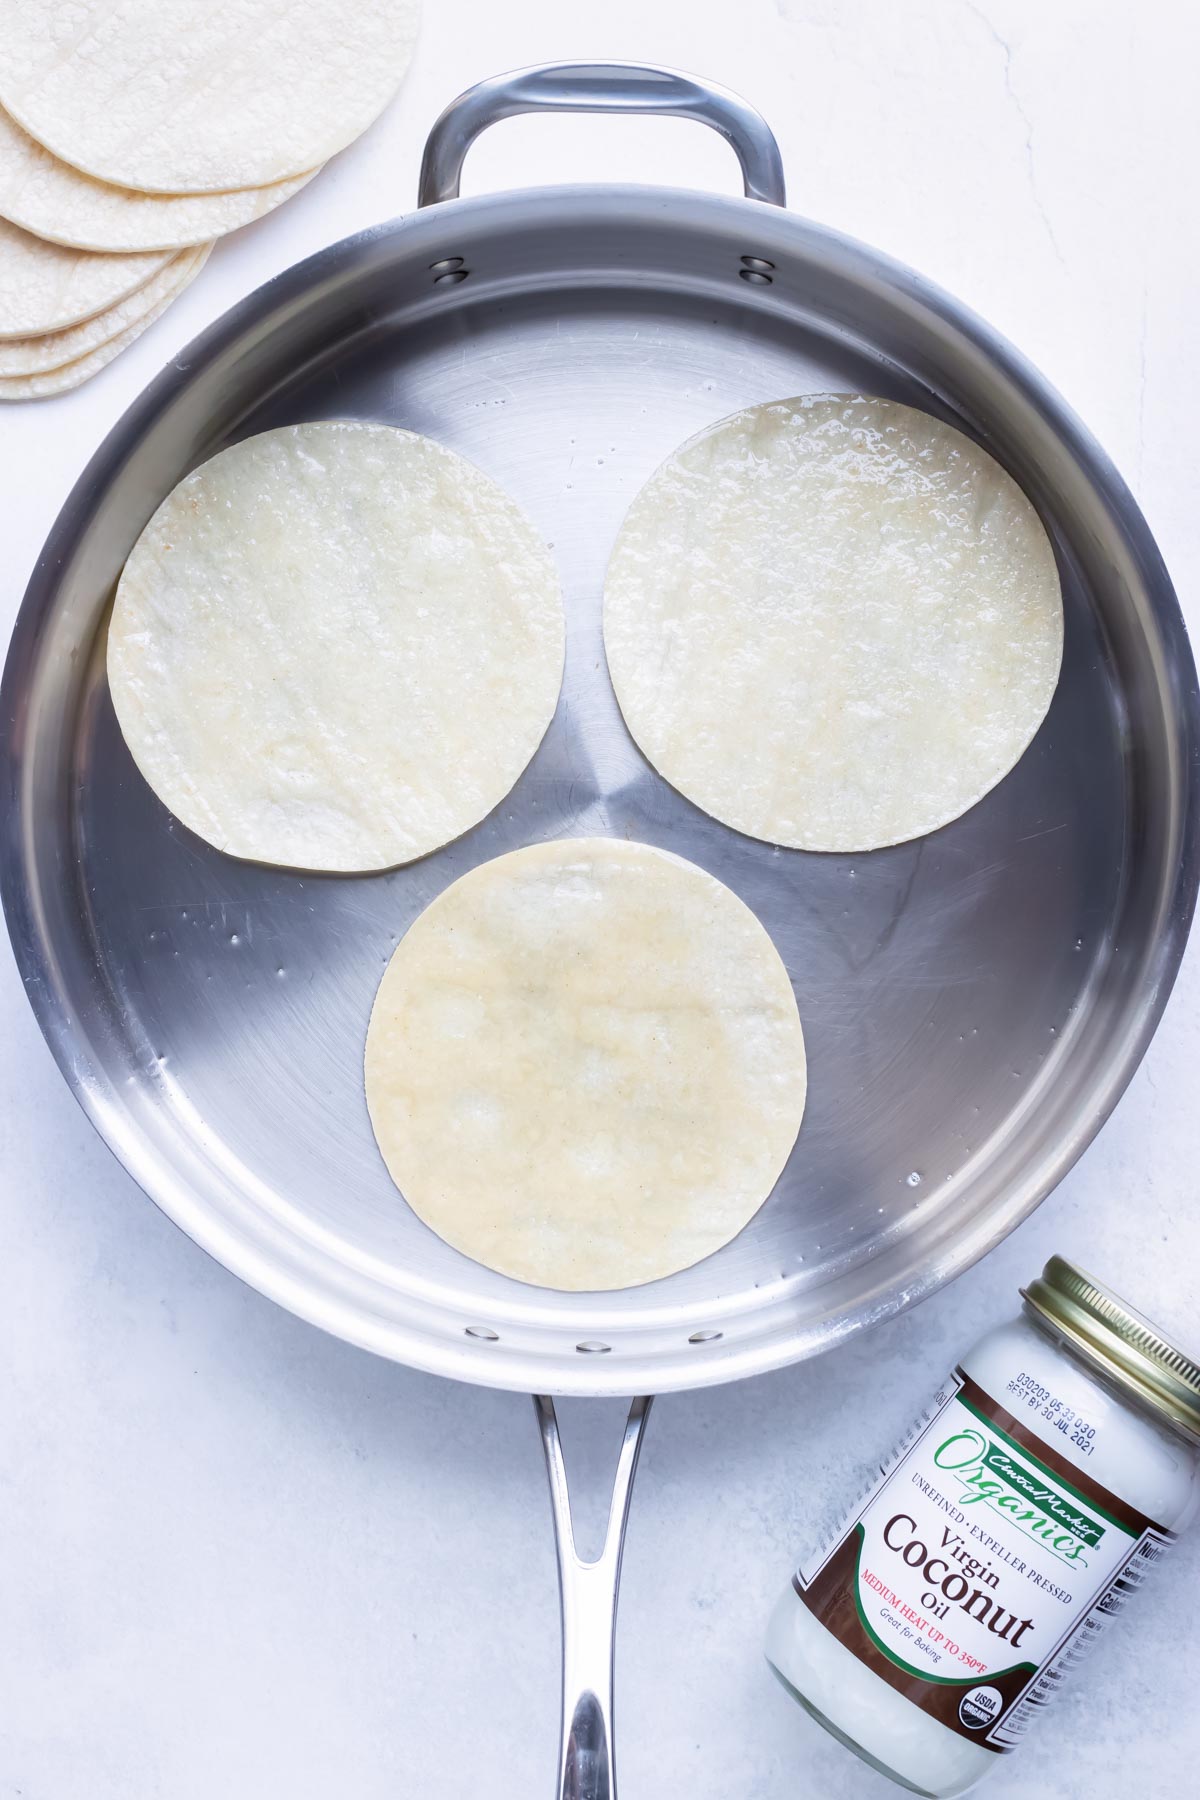 Heating up corn tortillas in a skillet with oil to make them pliable to roll up easily.